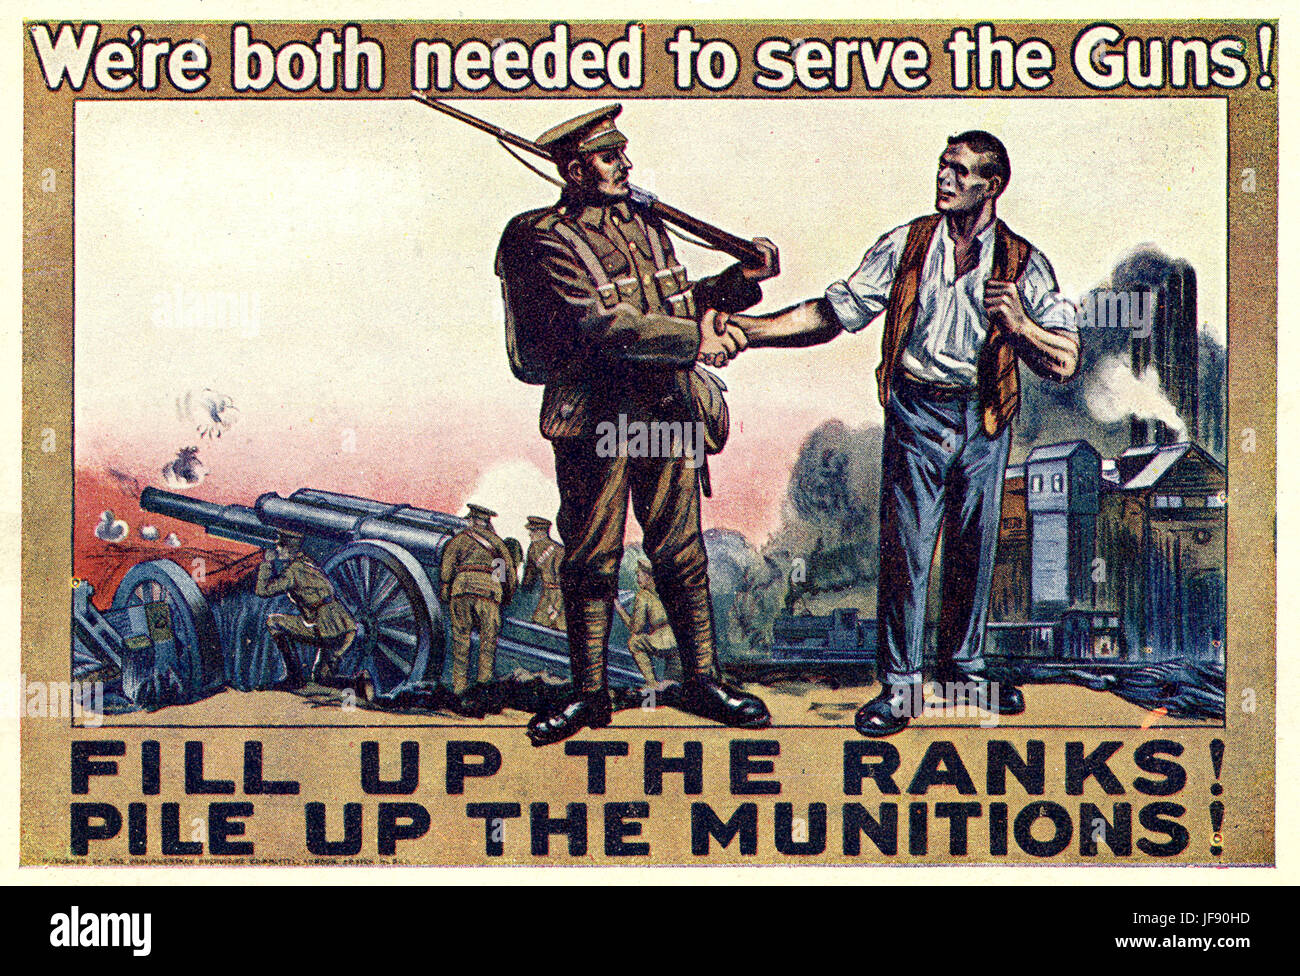 First World War British recruitment poster showing a front line soldier shaking hands with a worker in a munitions factory. Caption reads: 'We're both needed to serve the guns! Fill up the ranks! Pile up the munitions!' Stock Photo